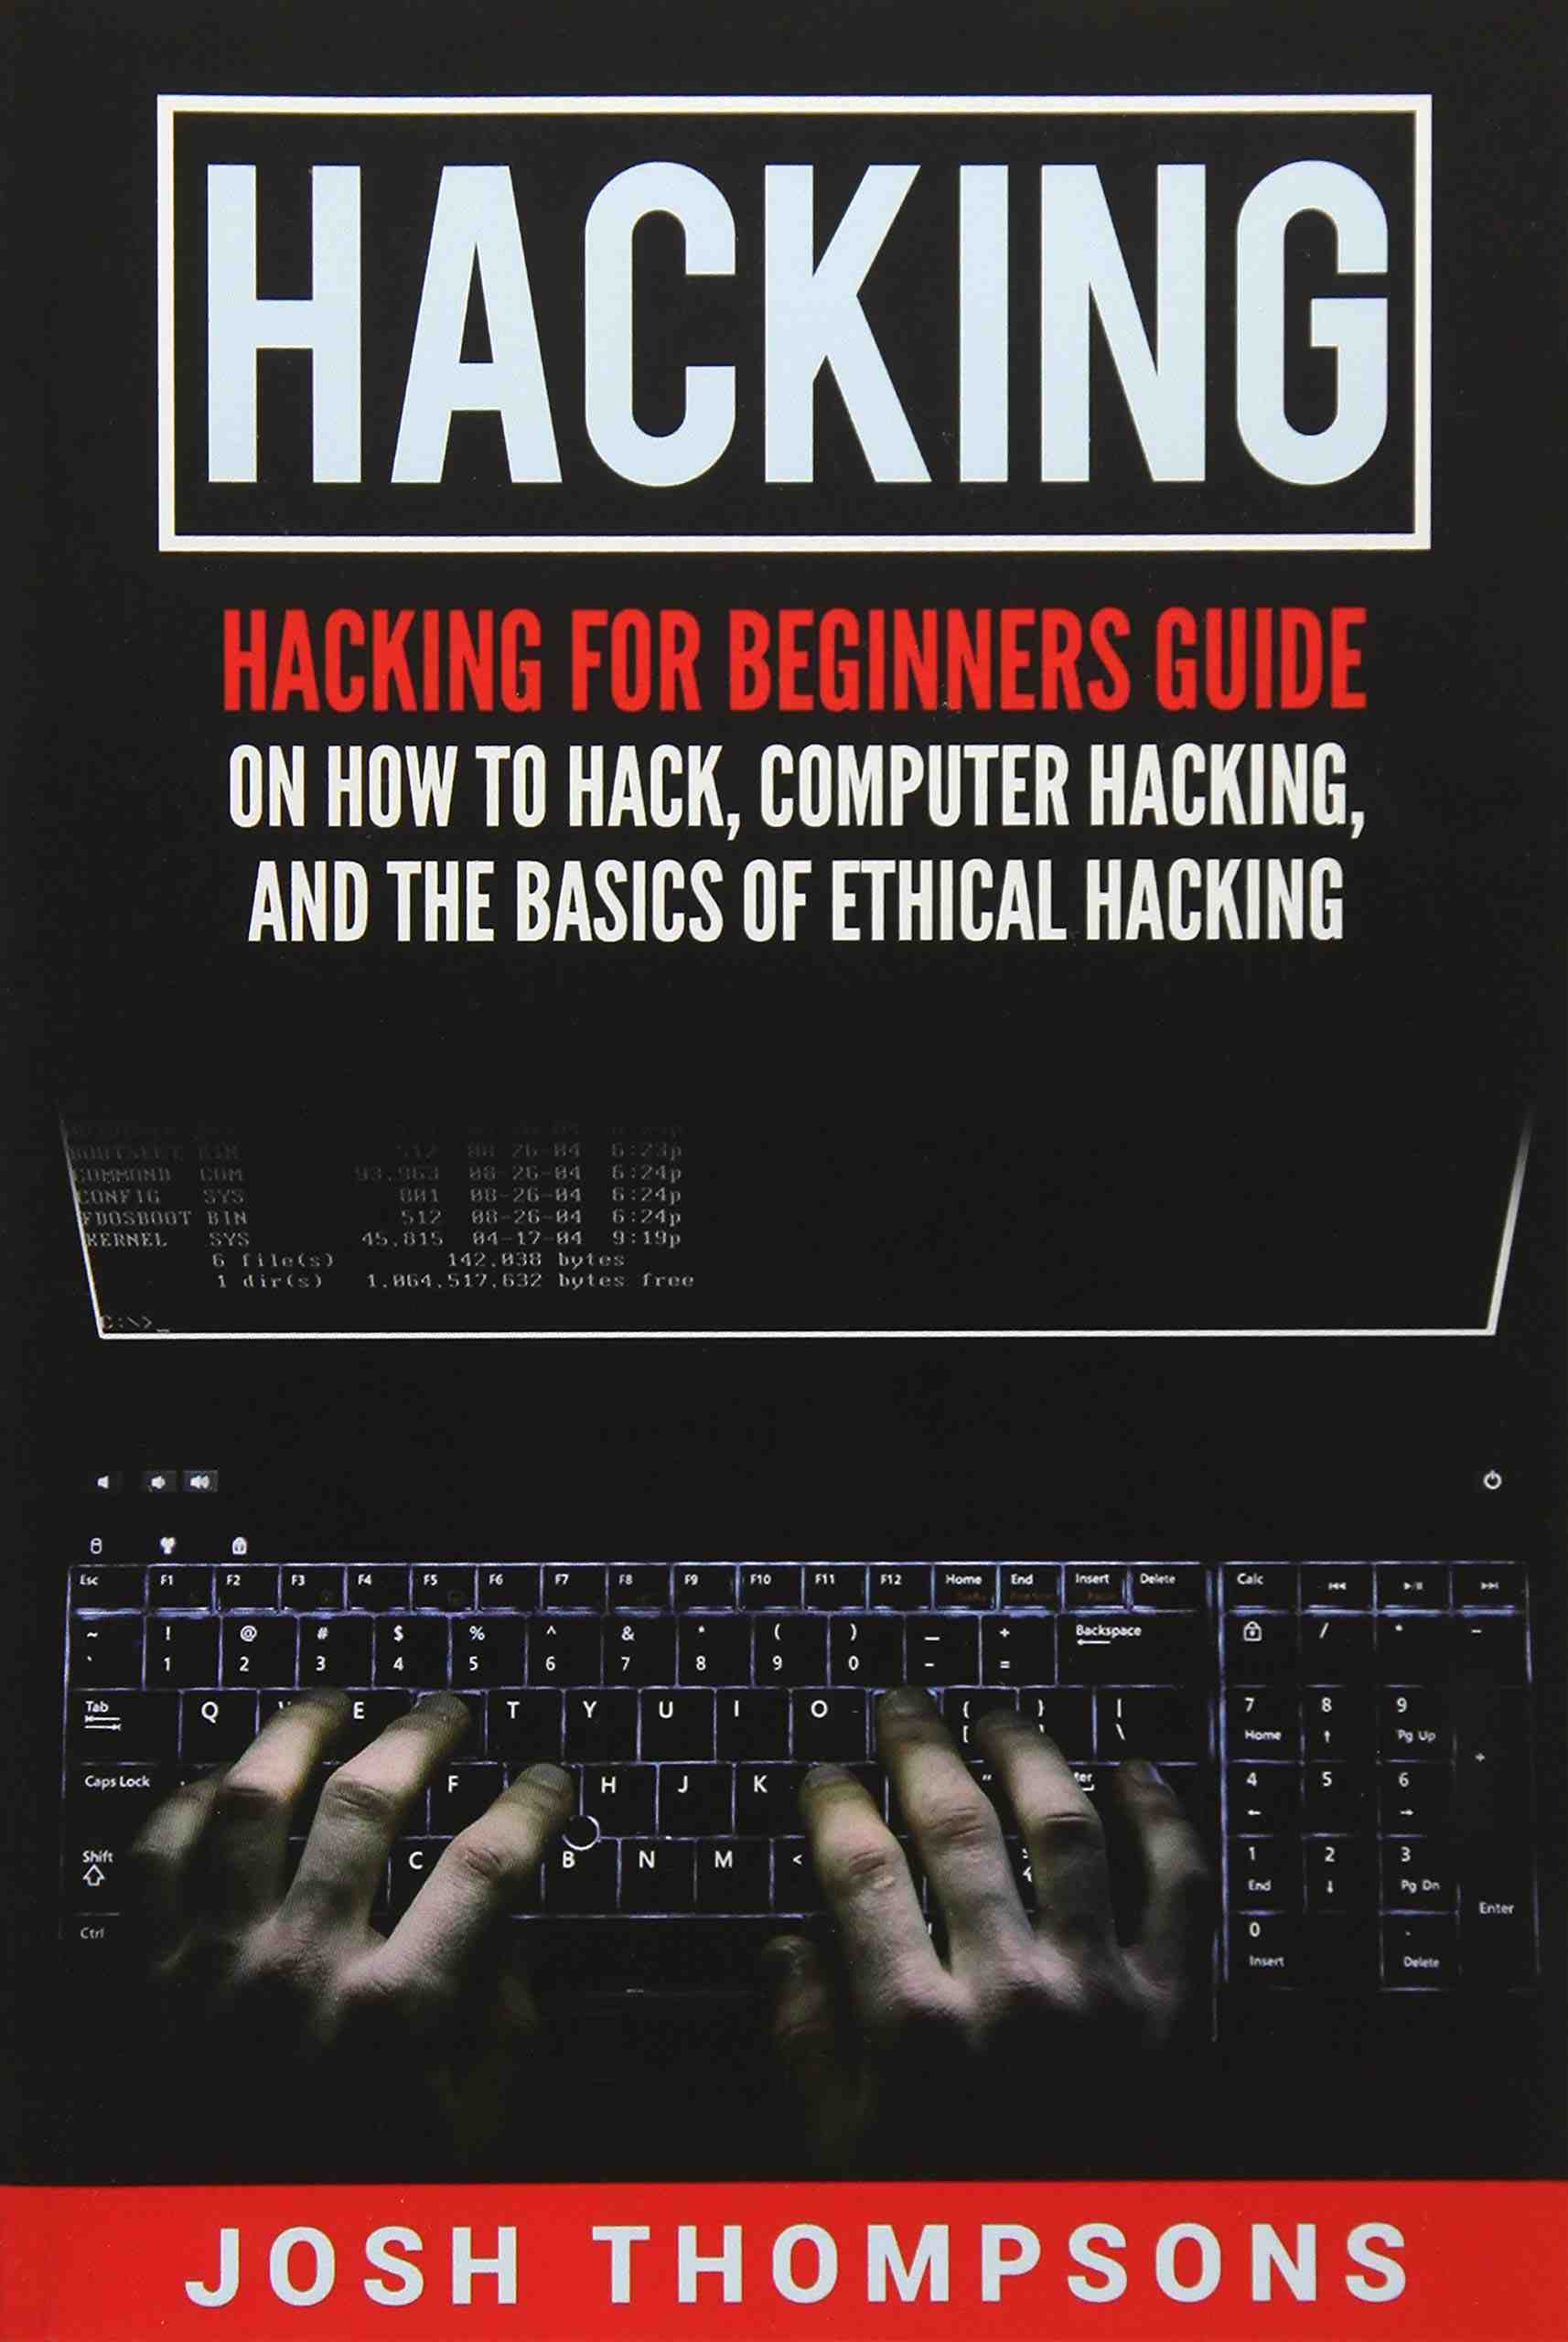 What is required to become a hacker?